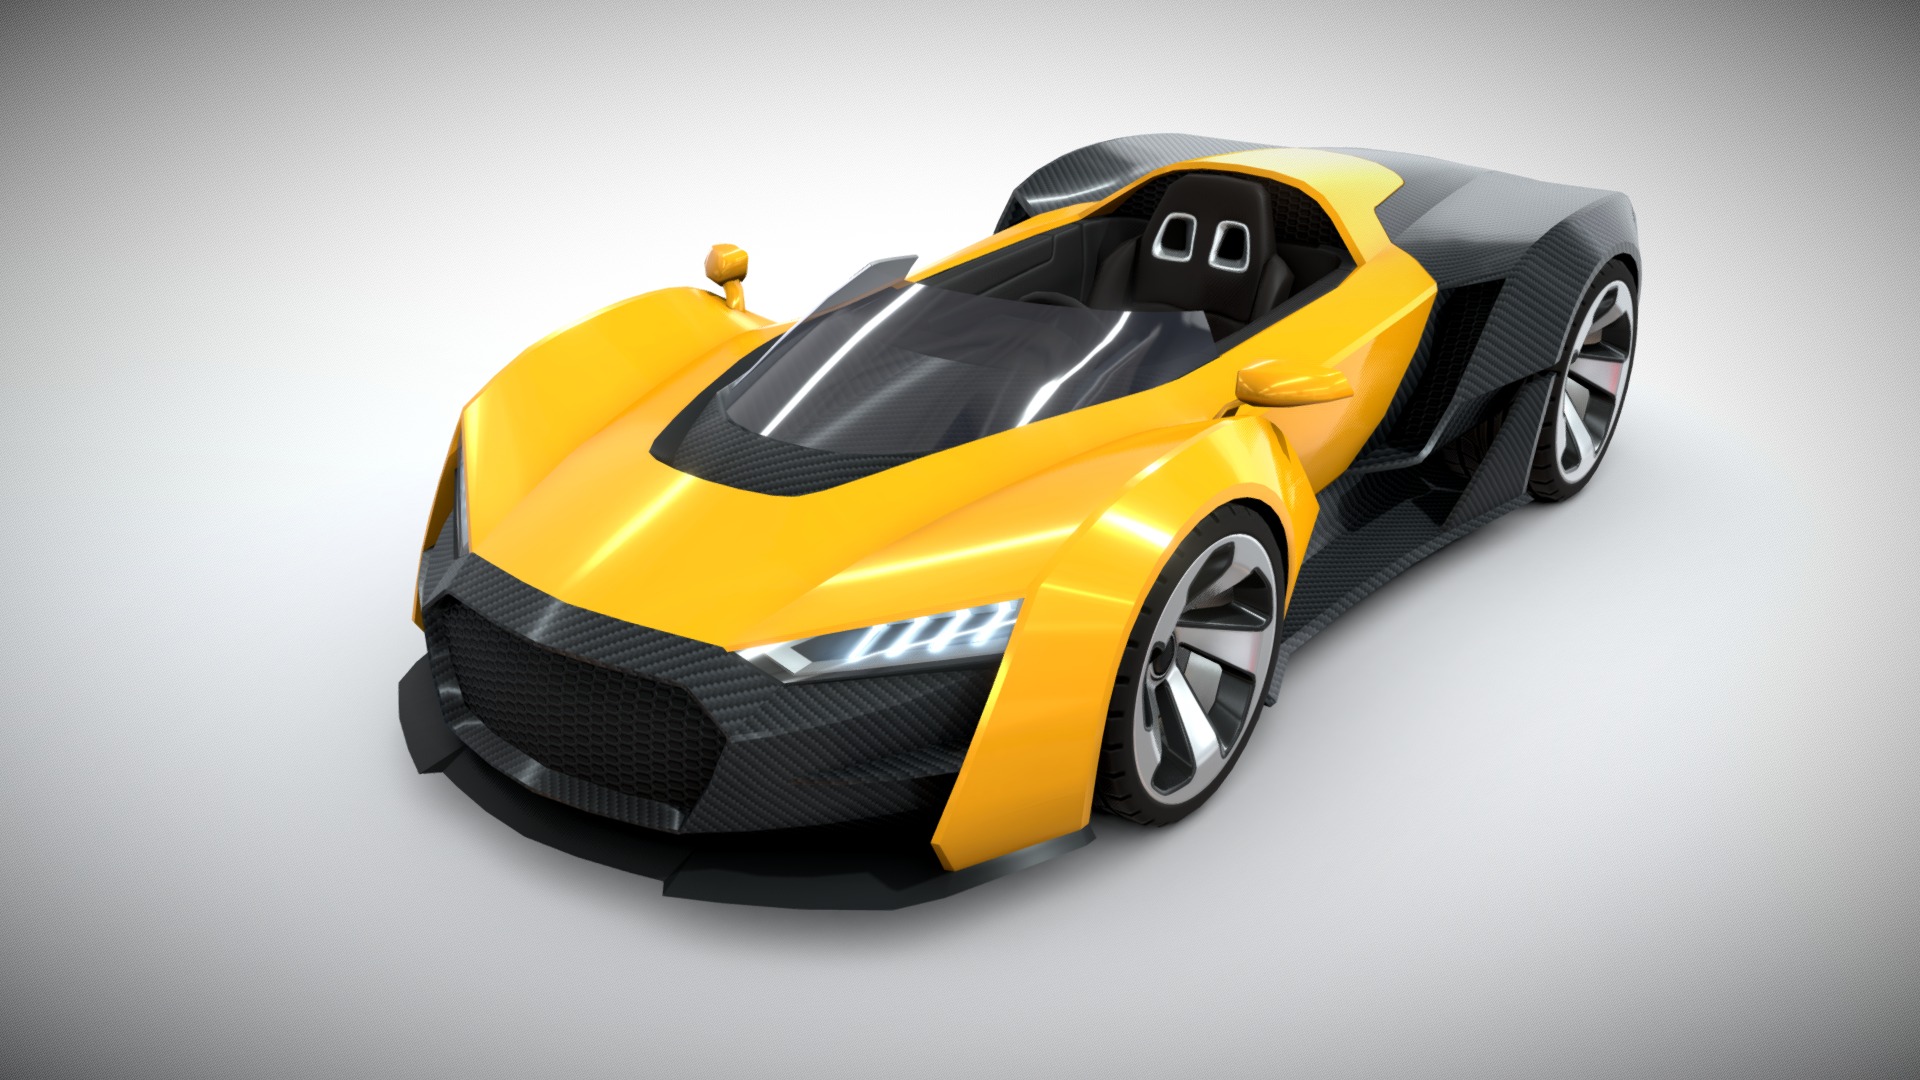 3D model Race Kart 06 - This is a 3D model of the Race Kart 06. The 3D model is about a yellow and black sports car.